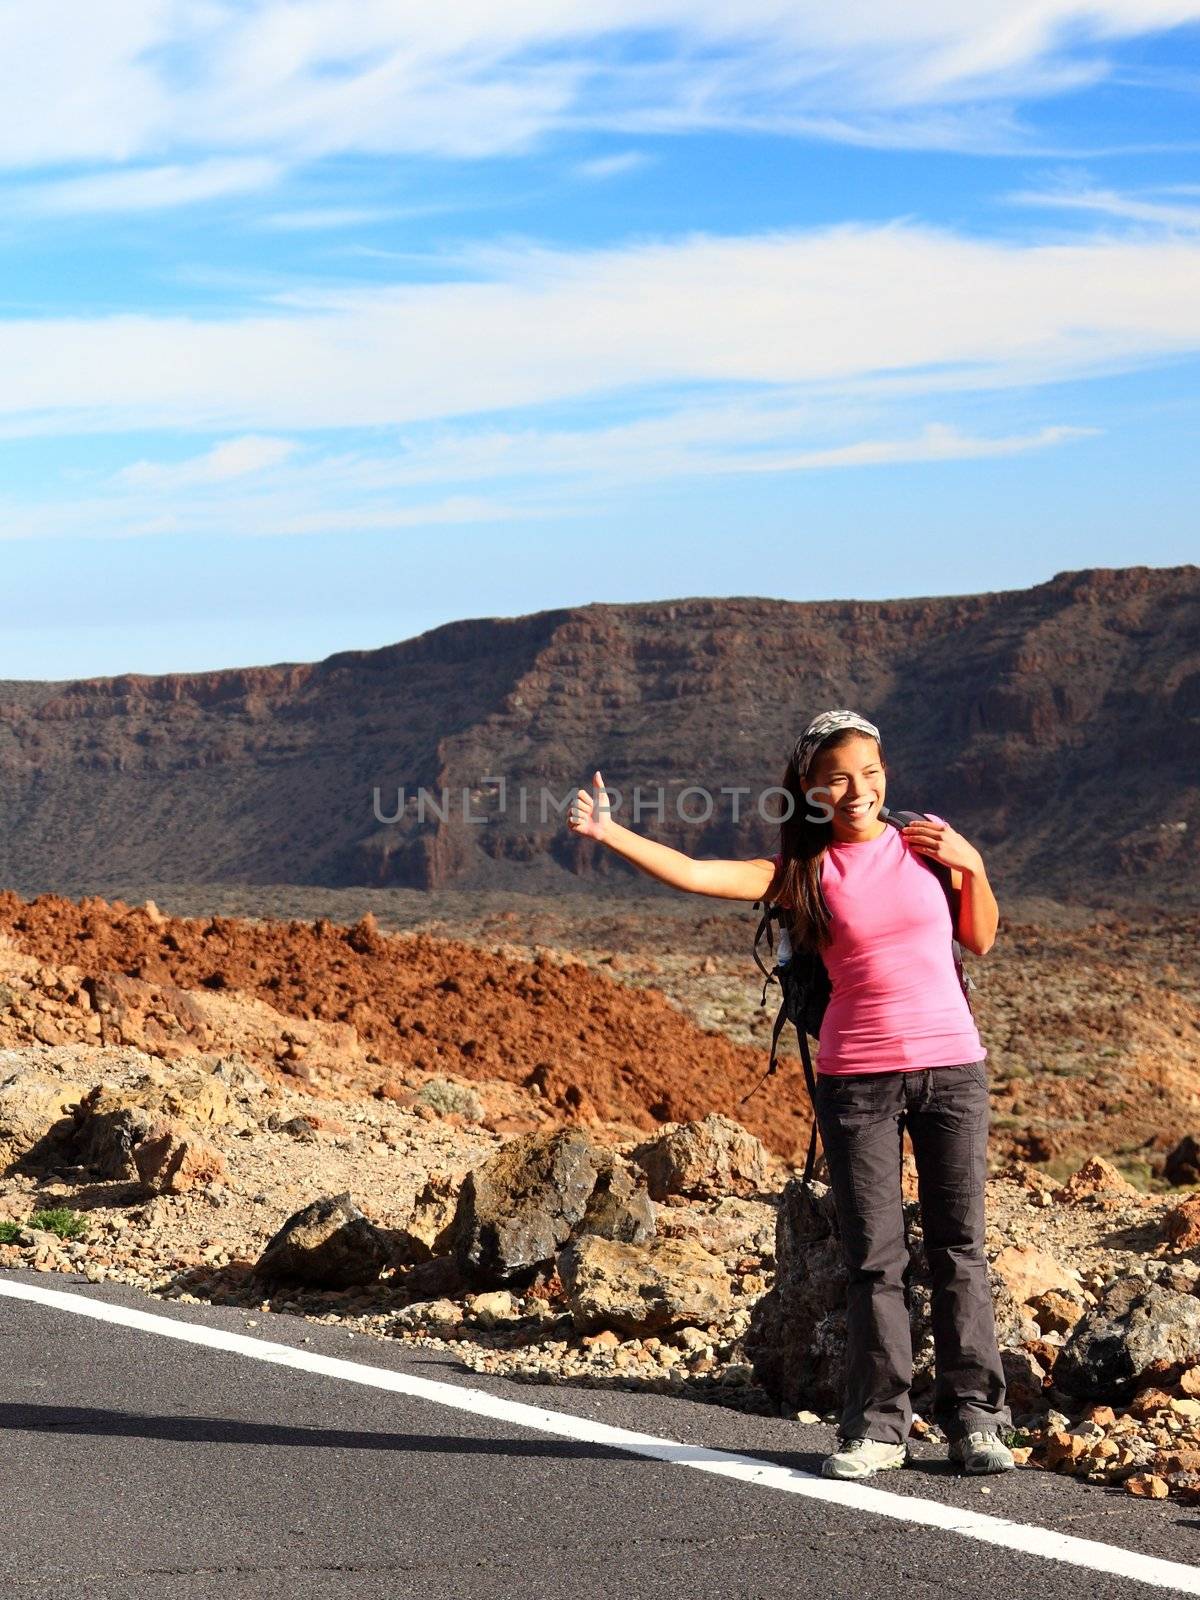 Girl Backpacking / Hitchhiking on Teide, Tenerife. Mixed chinese / caucasian woman model.